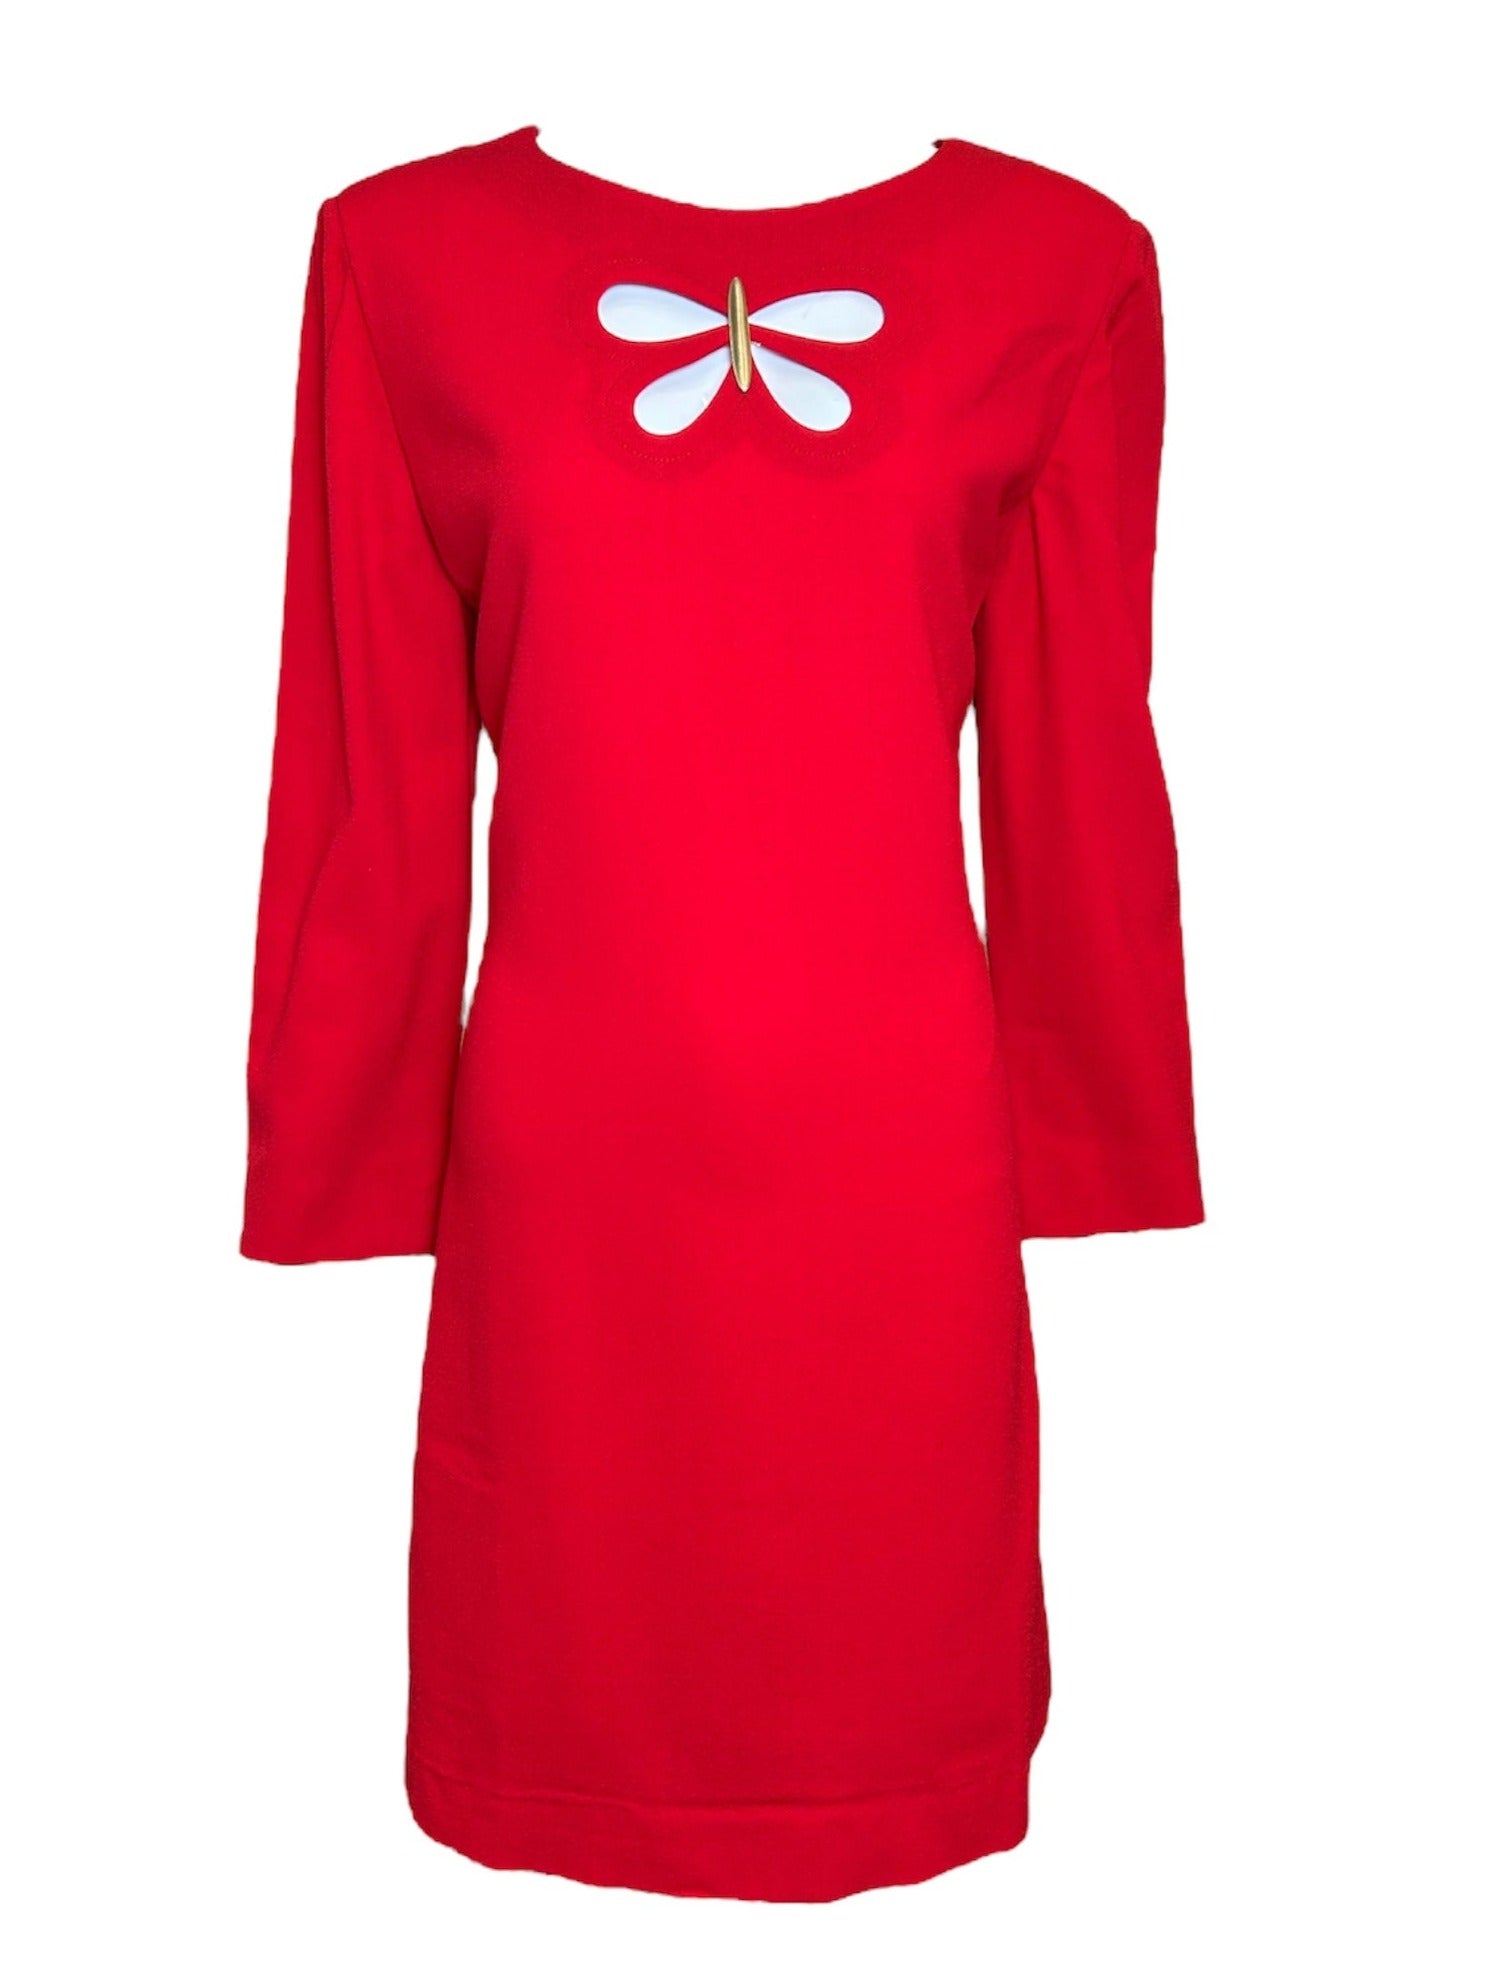 Pierre Cardin Red Mod Butterly Shift Dress FRONT PHOTO 1 OF 5